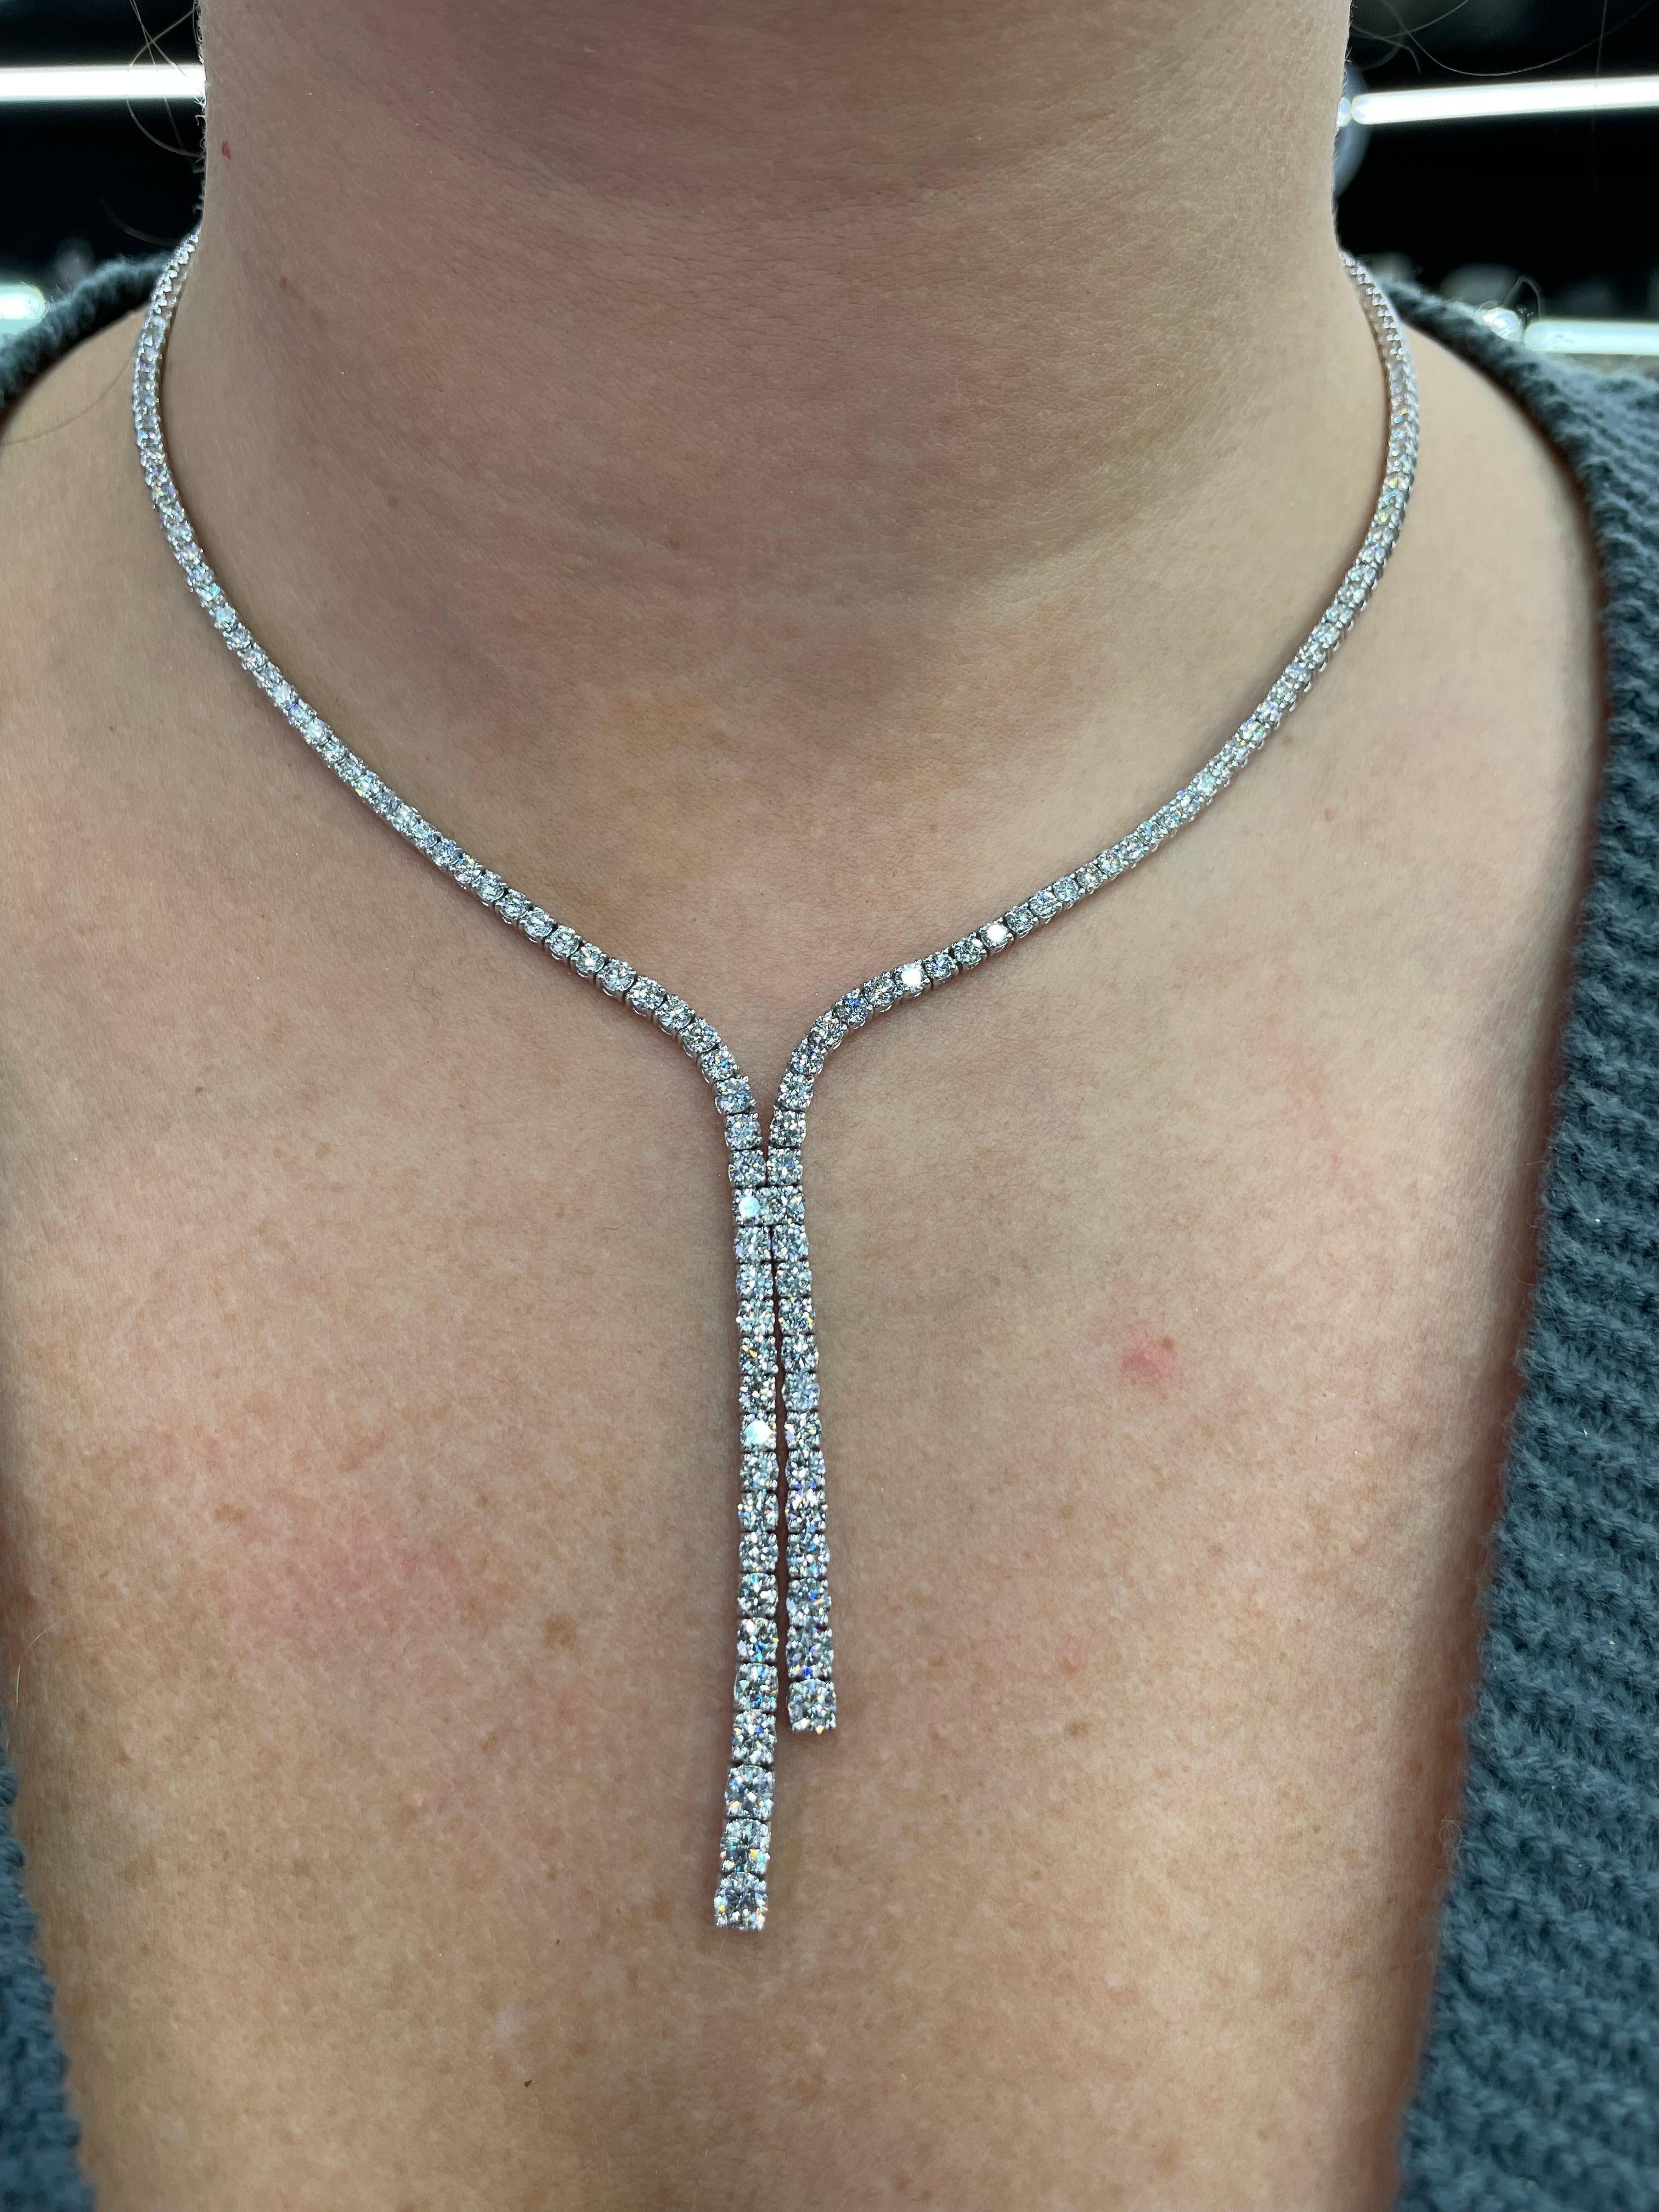 14 Karat White Gold tennis necklace featuring 118 round brilliants weighing 7.52 carats.
Color G-H
Clarity SI1-SI2

Drop measures 1.5-2 Inches long
Diamond illusion is 4 inches on each side. 